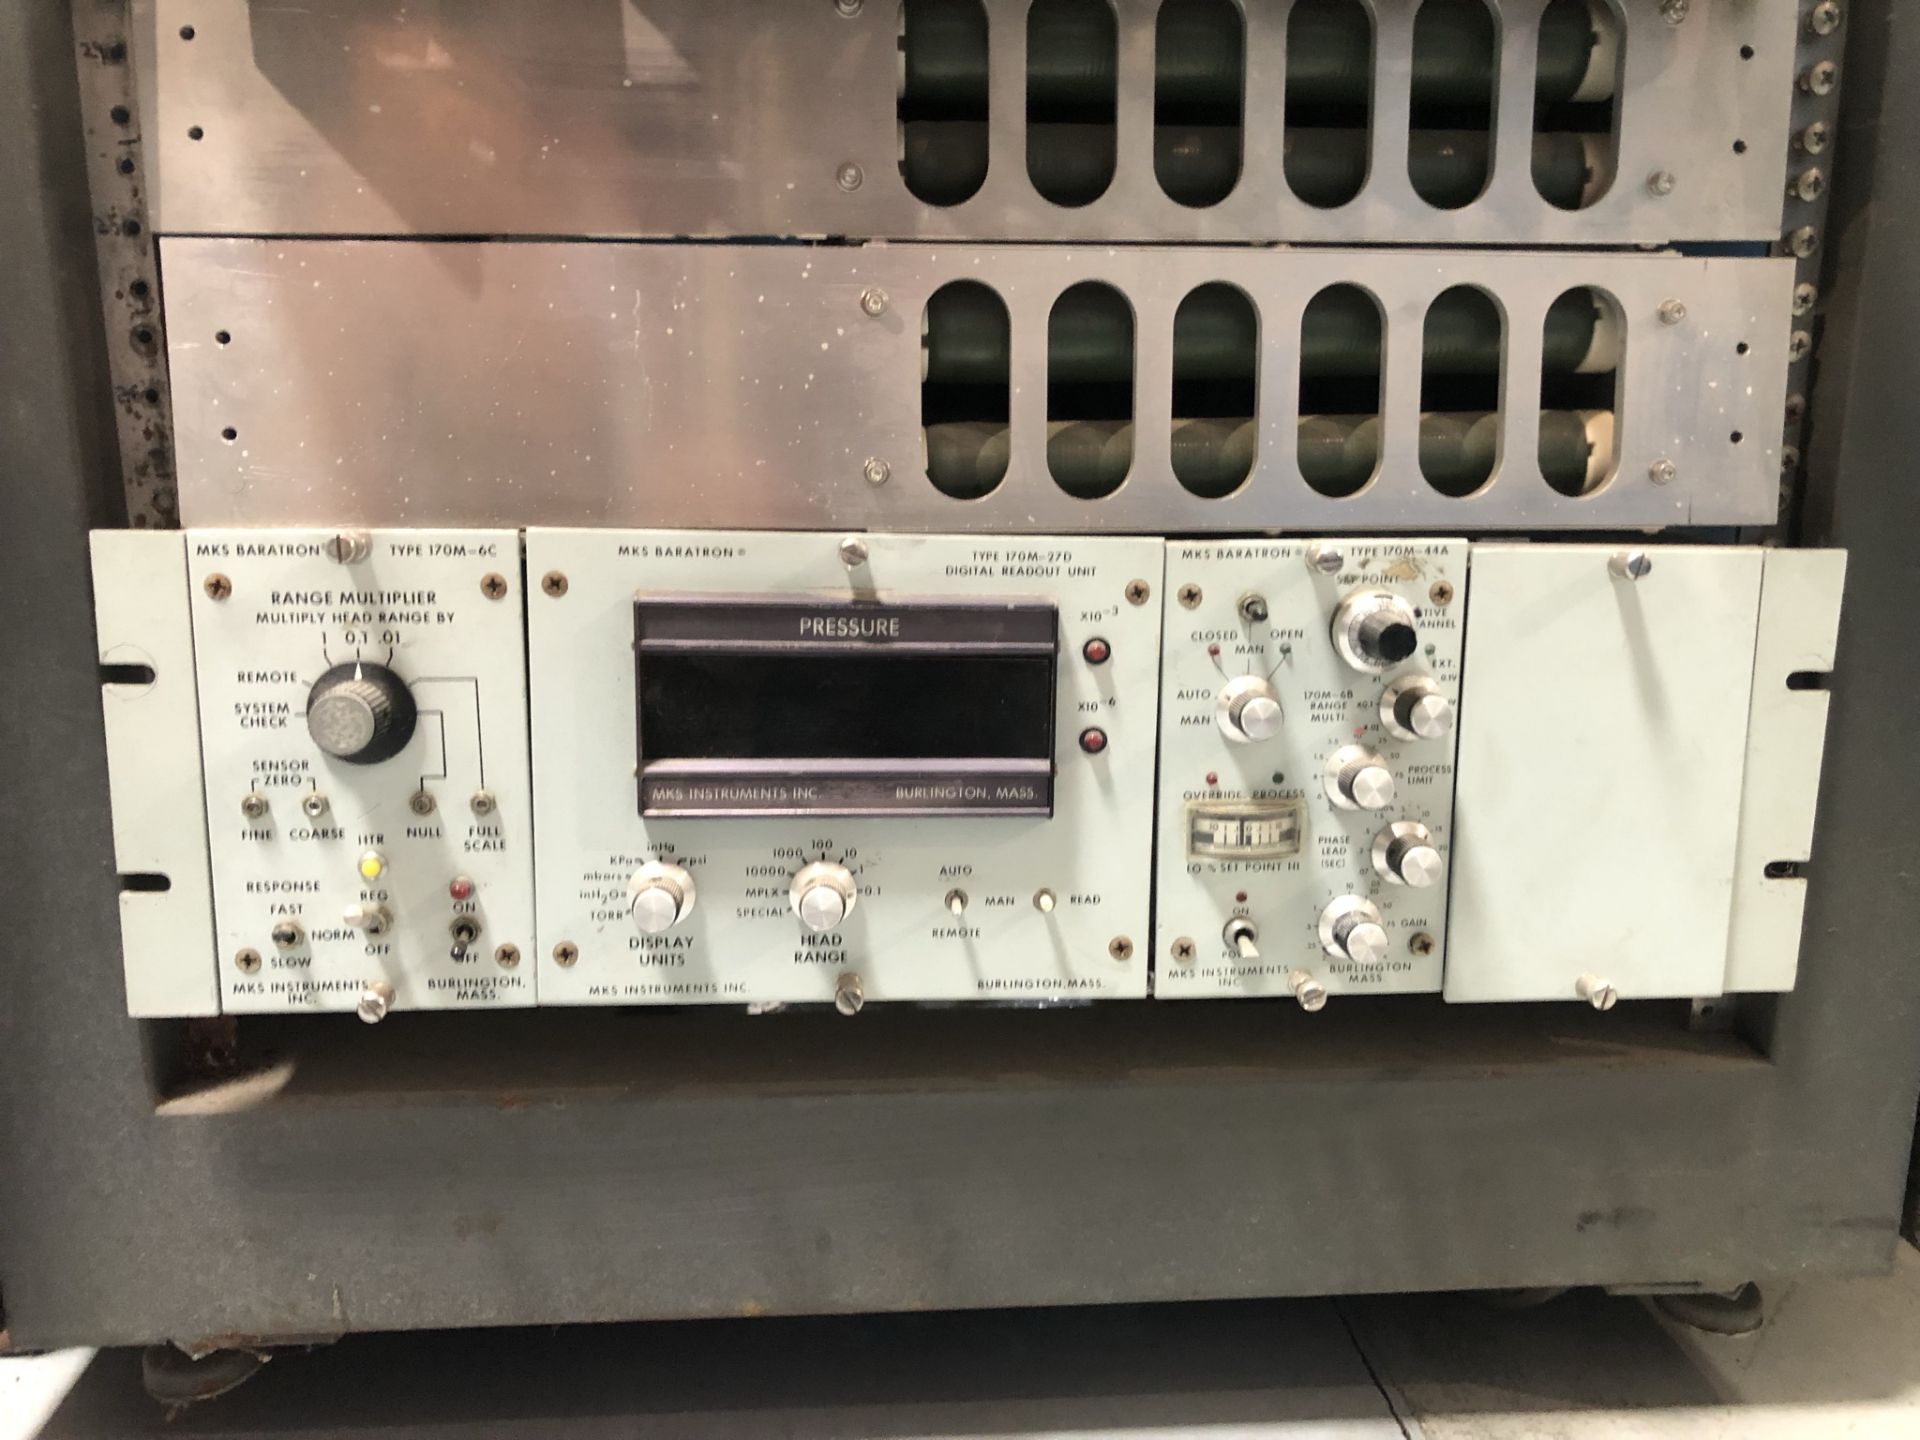 General Automation 19" rack, NKS Baratron pressure readout and control systems with misc 19" rack - Image 4 of 5